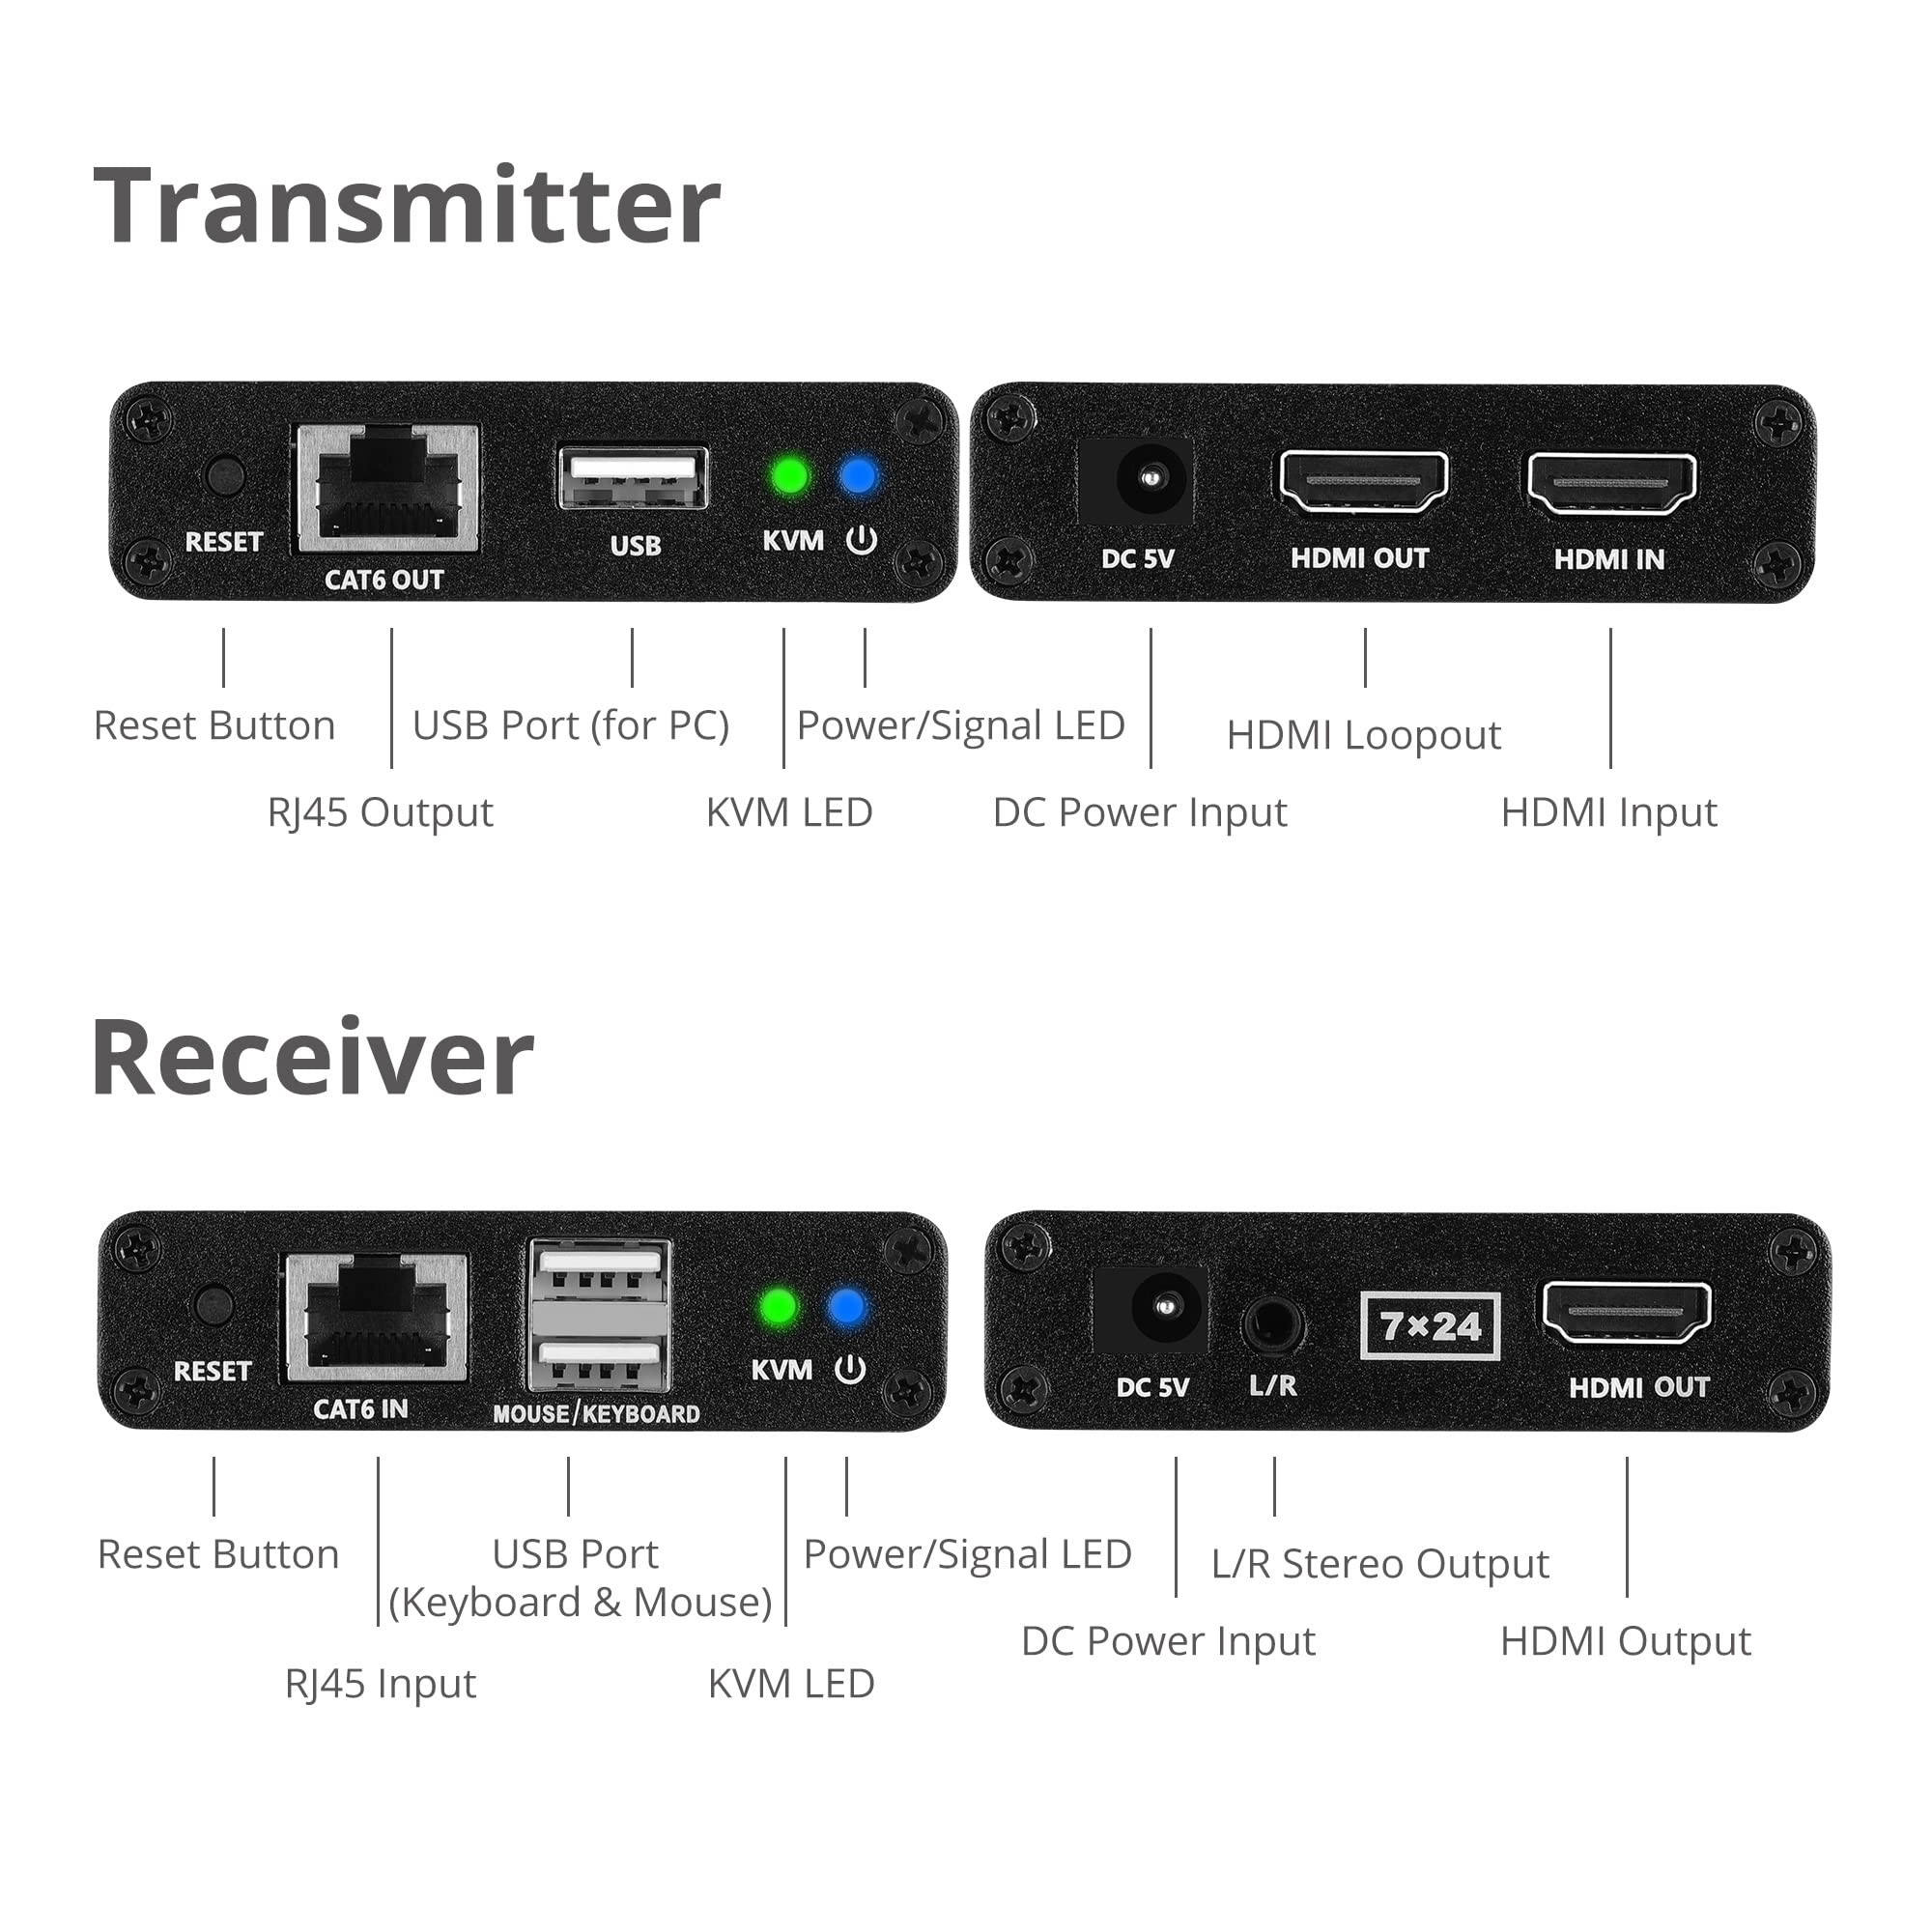 SIIG HDMI KVM Extender Over CAT6/ 6e/ 7 Cable up to 230ft, 1080p 60Hz HD with HDMI Loop Out, 2-Port USB for Keyboard/Mouse, Audio Extractor, Near Zero Latency, Transmitter & Receiver (CE-H27411-S1)